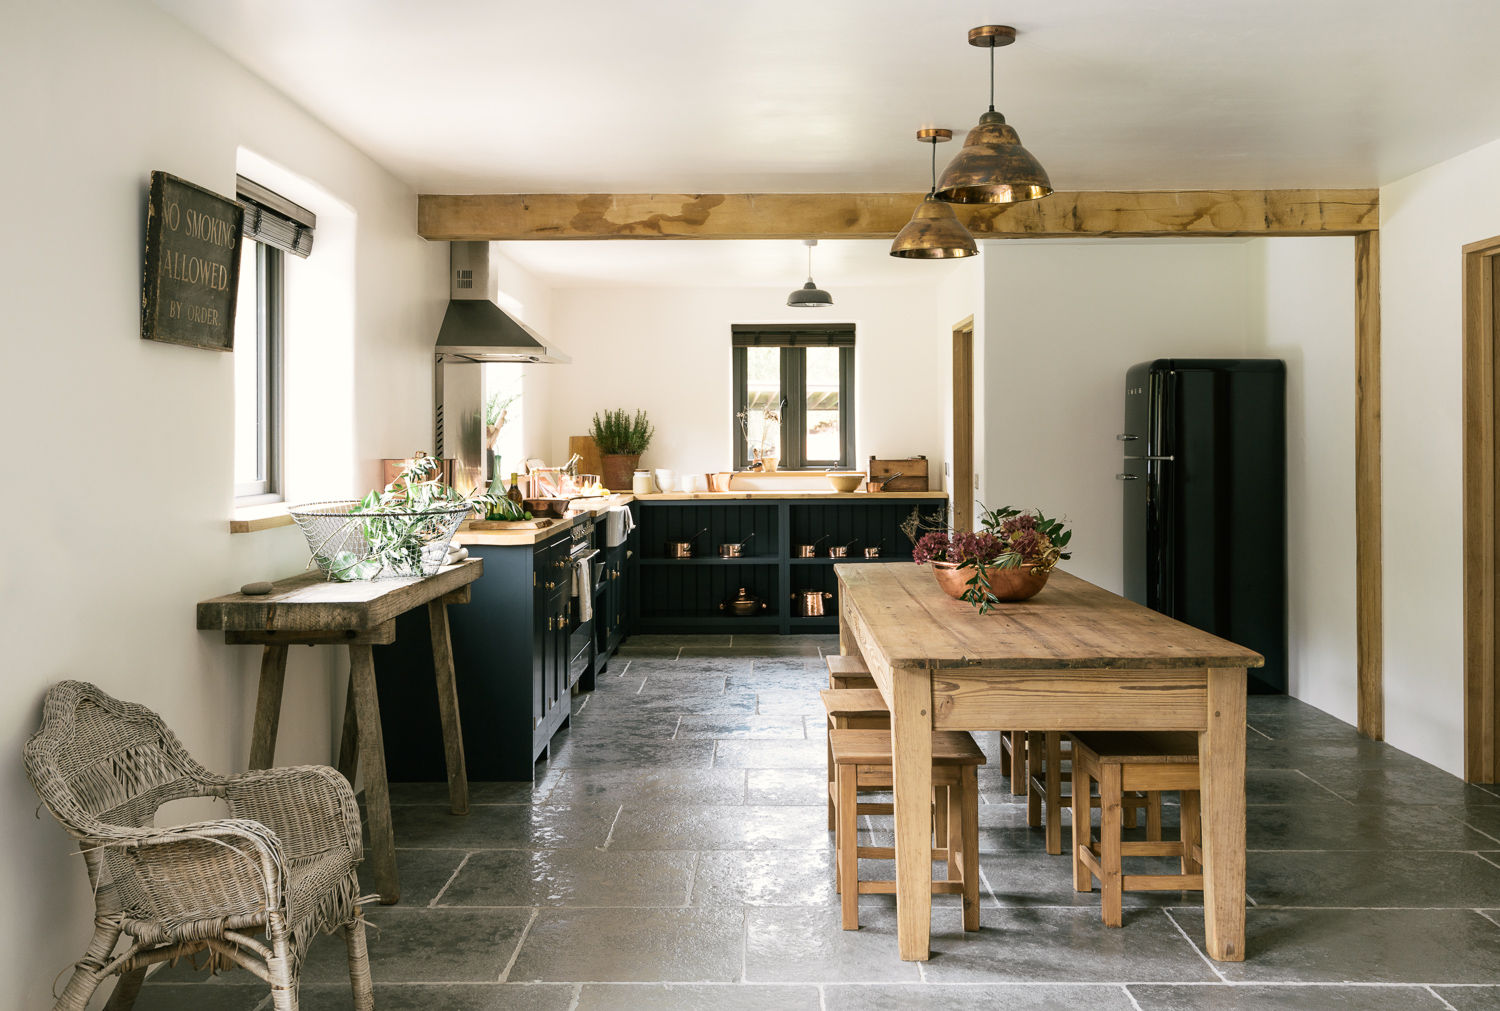 The Leicestershire Kitchen in the Woods by deVOL deVOL Kitchens Кухня